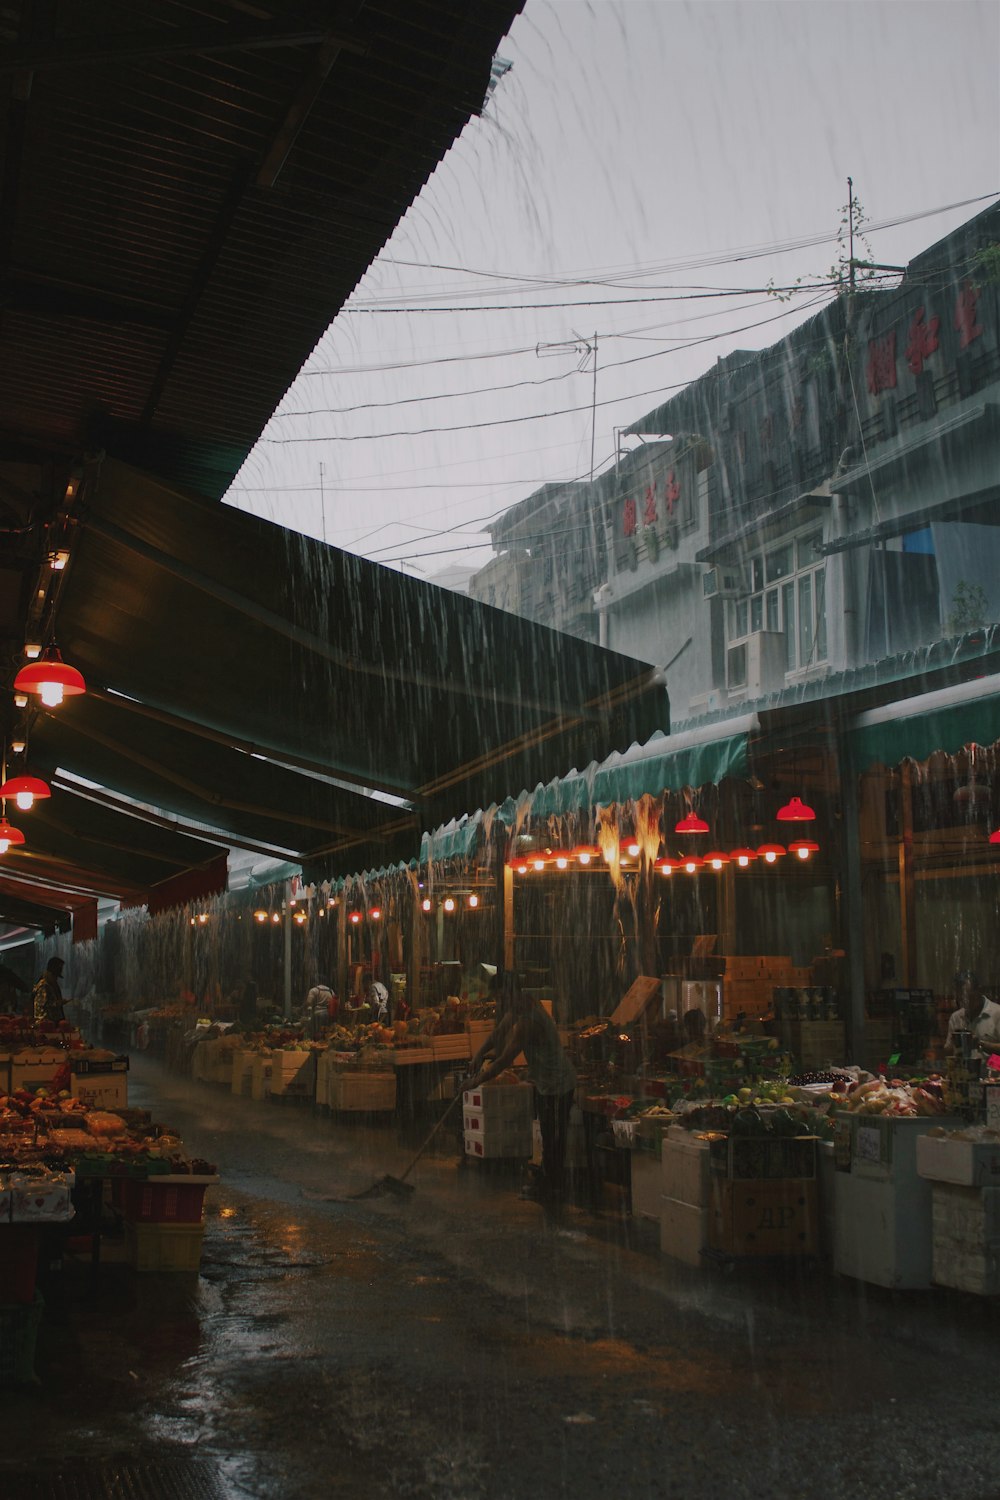 people in the market near different goods on display during rainy season